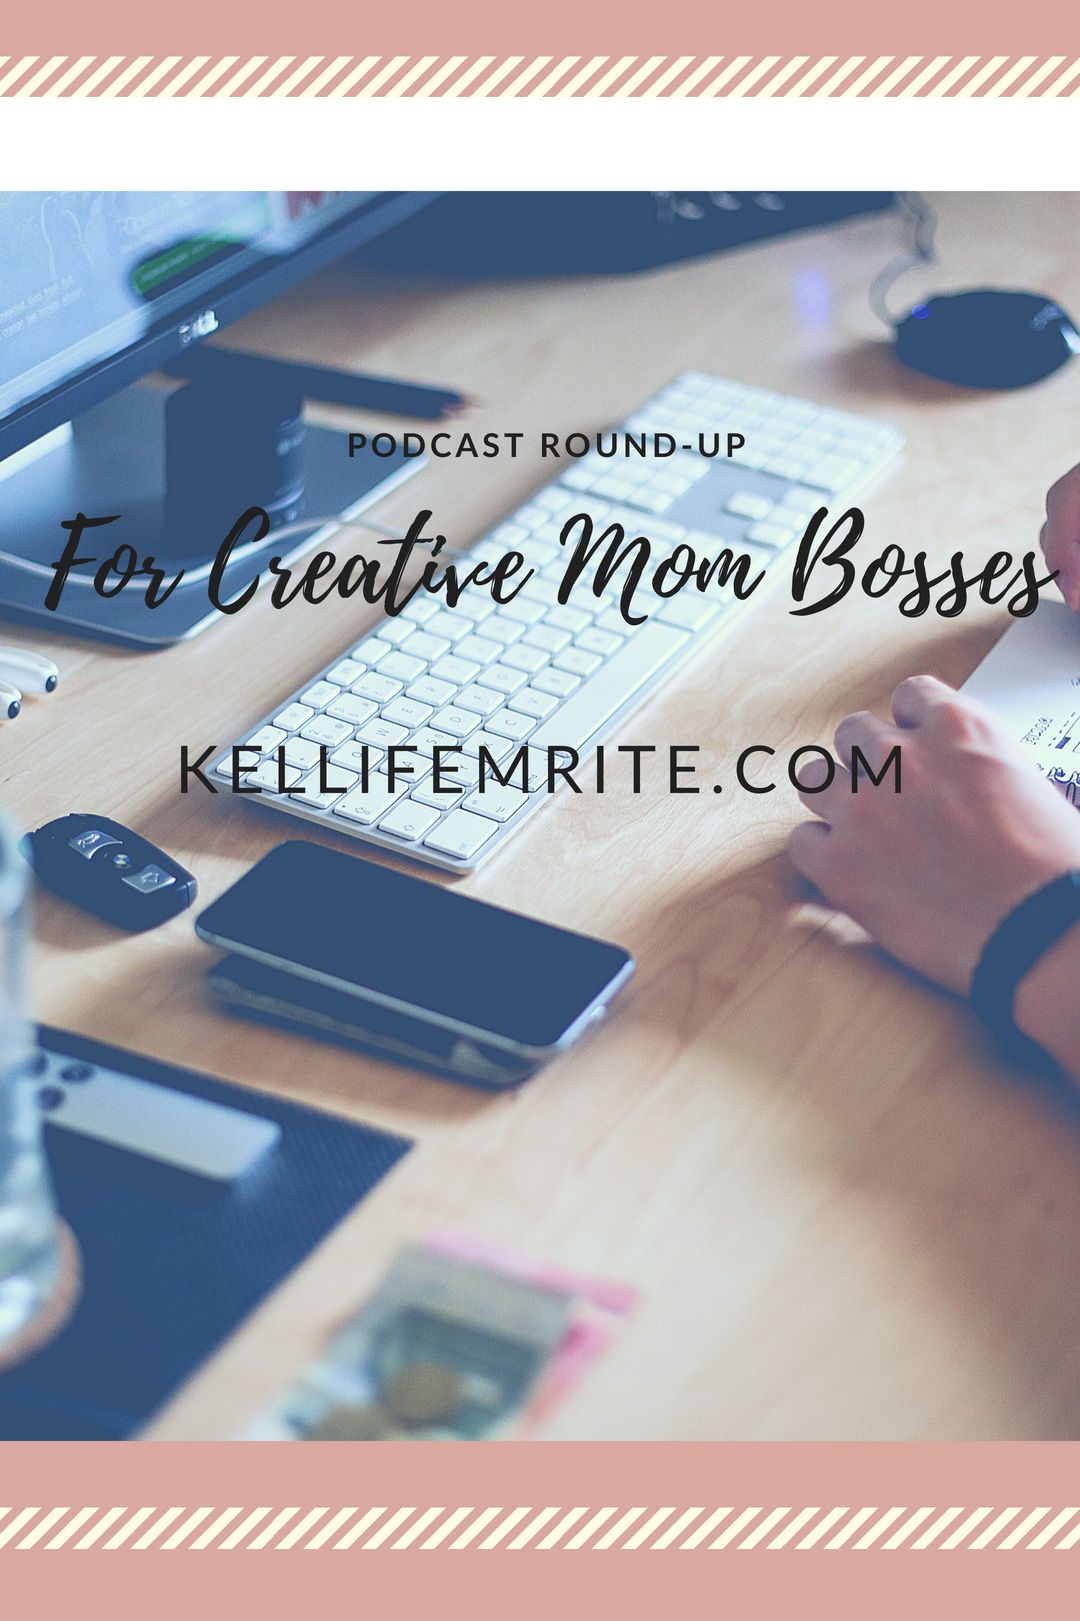 Podcast Round-Up for Creative Mom Bosses